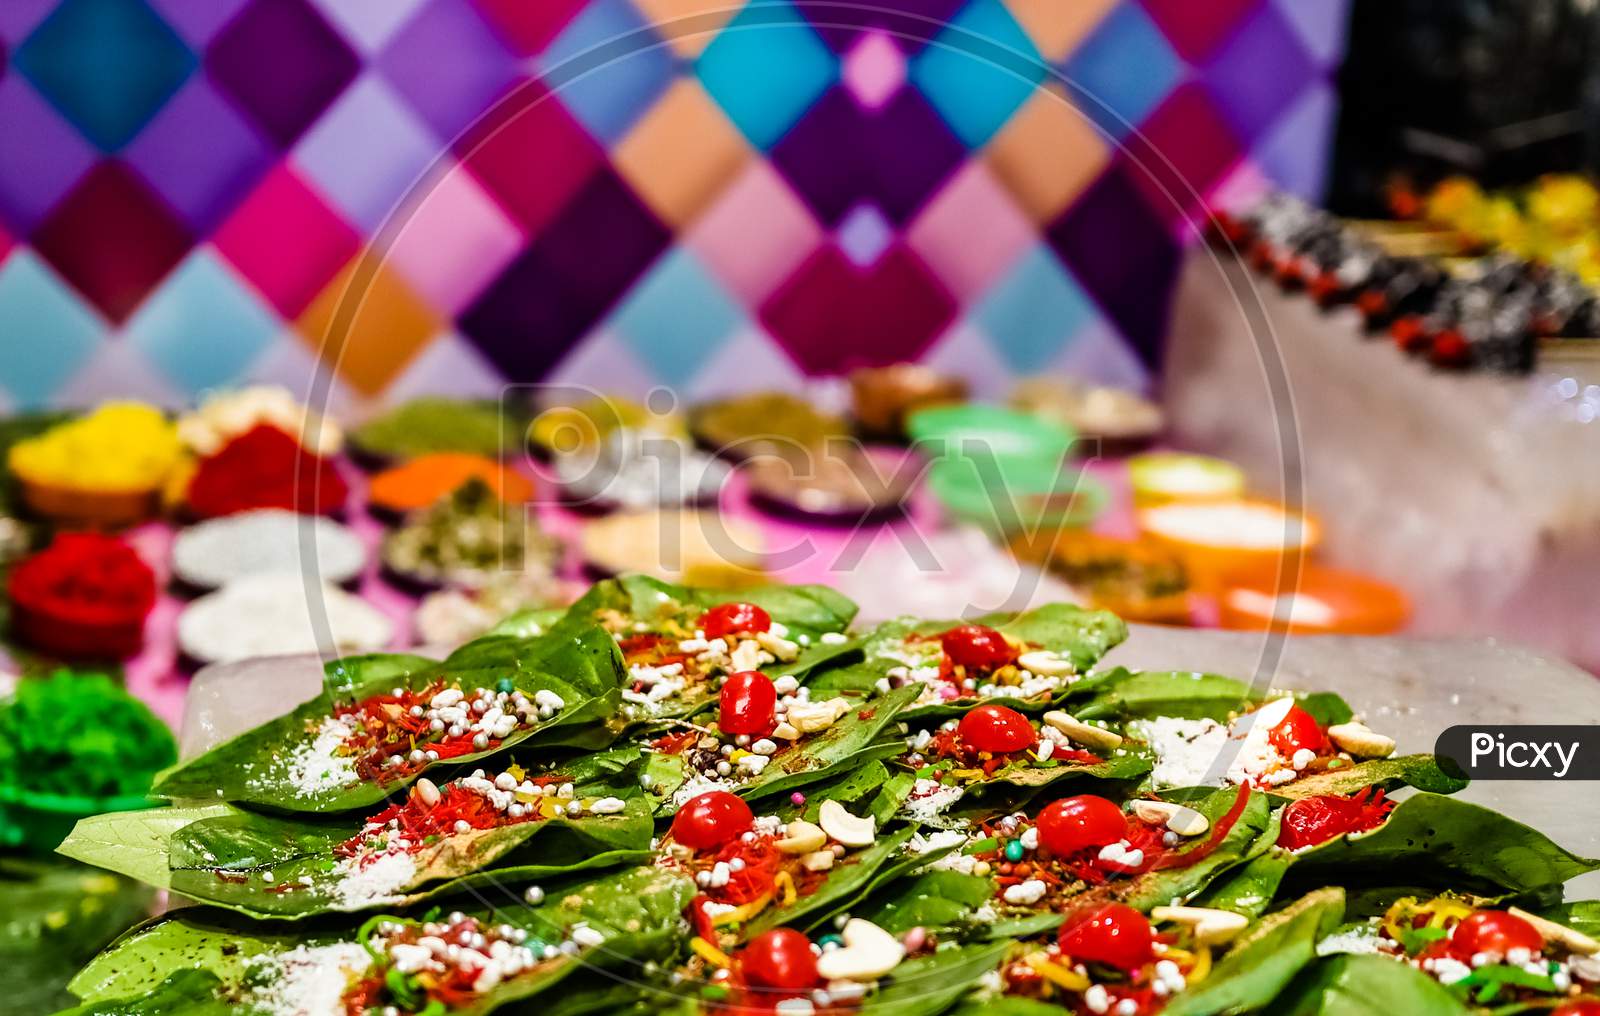 Collection Of Betel Leaf Banarasi Paan And Fire Paan Displayed For Sale At A Shop With Selective Focus And Blurred Background.